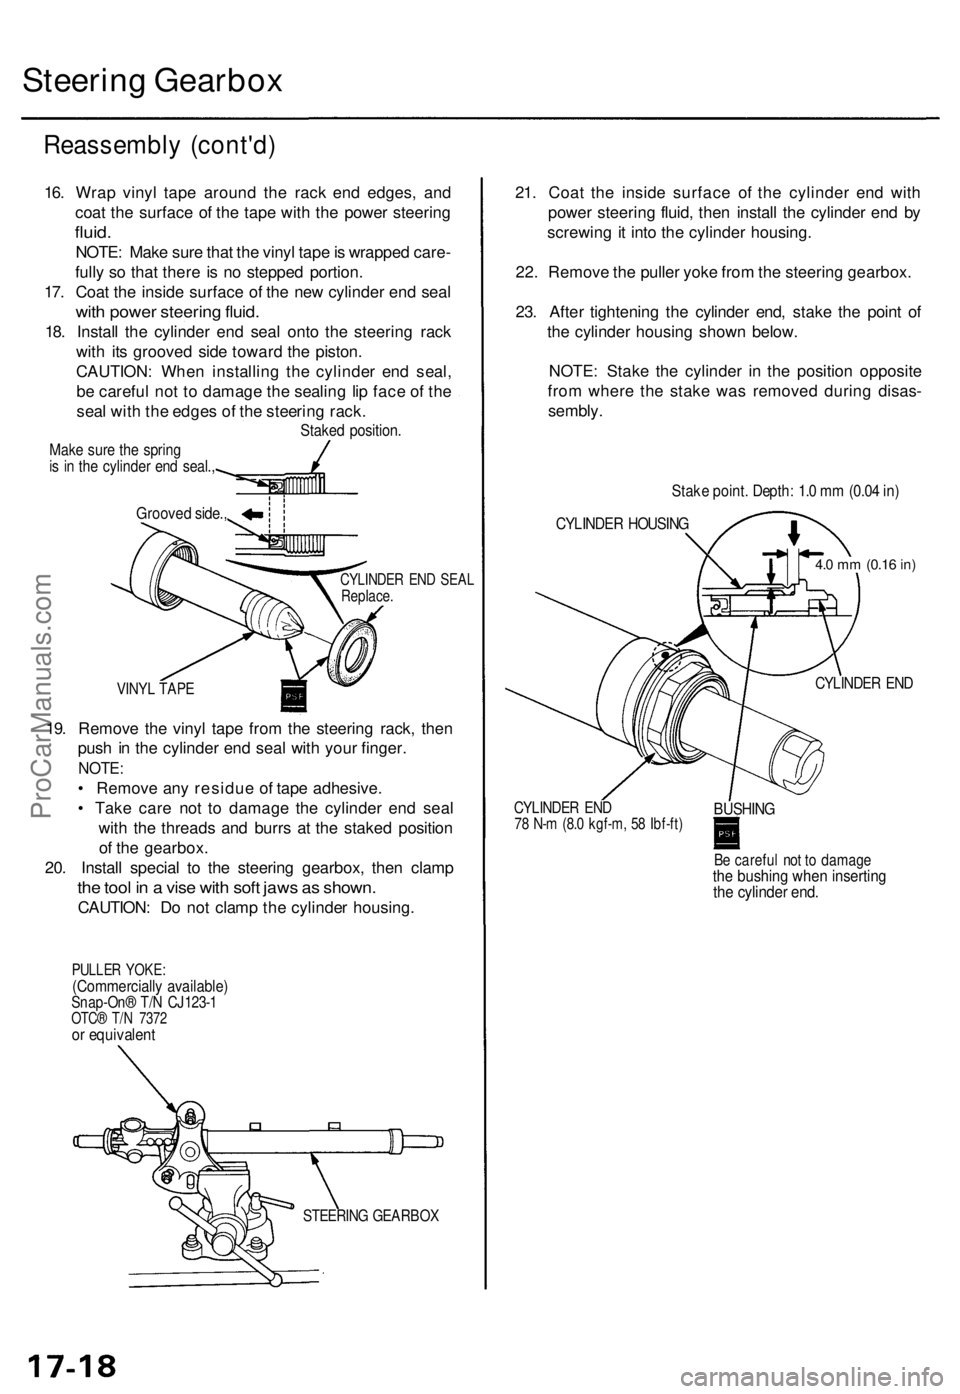 ACURA TL 1995  Service Repair Manual 
Steering Gearbox

Reassembly (cont'd)

CYLINDER END SEAL

Replace.

VINYL TAPE

19. Remove the vinyl tape from the steering rack, then

push in the cylinder end seal with your finger.

NOTE:

•